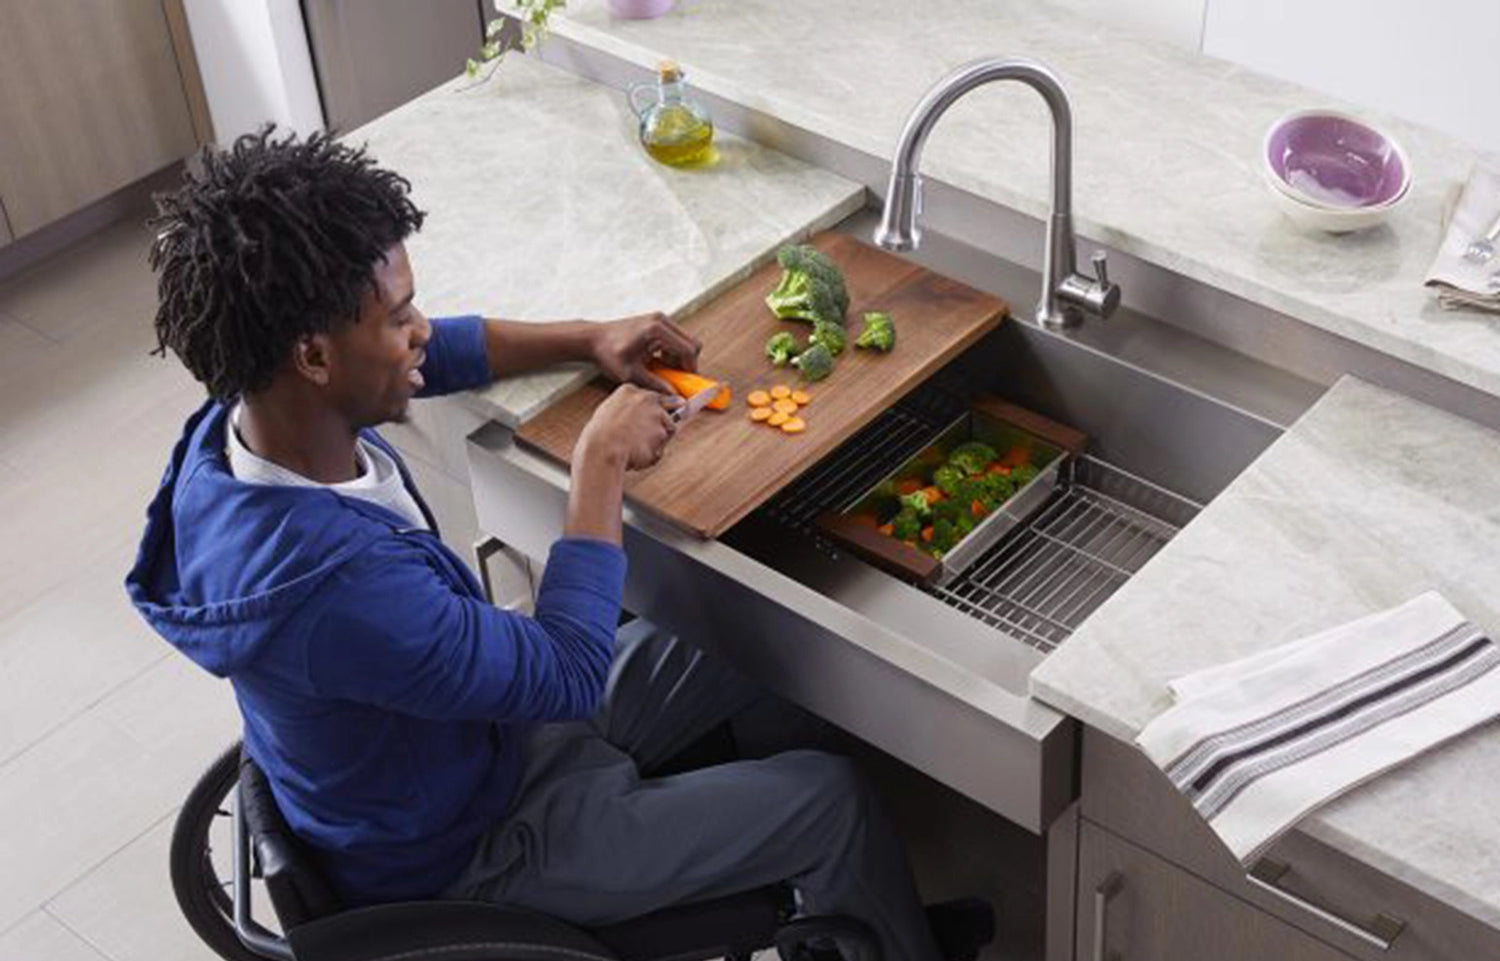 A boy in a wheelchair is slicing vegetables on a wooden cutting board, utilizing an ADA-compliant kitchen sink.